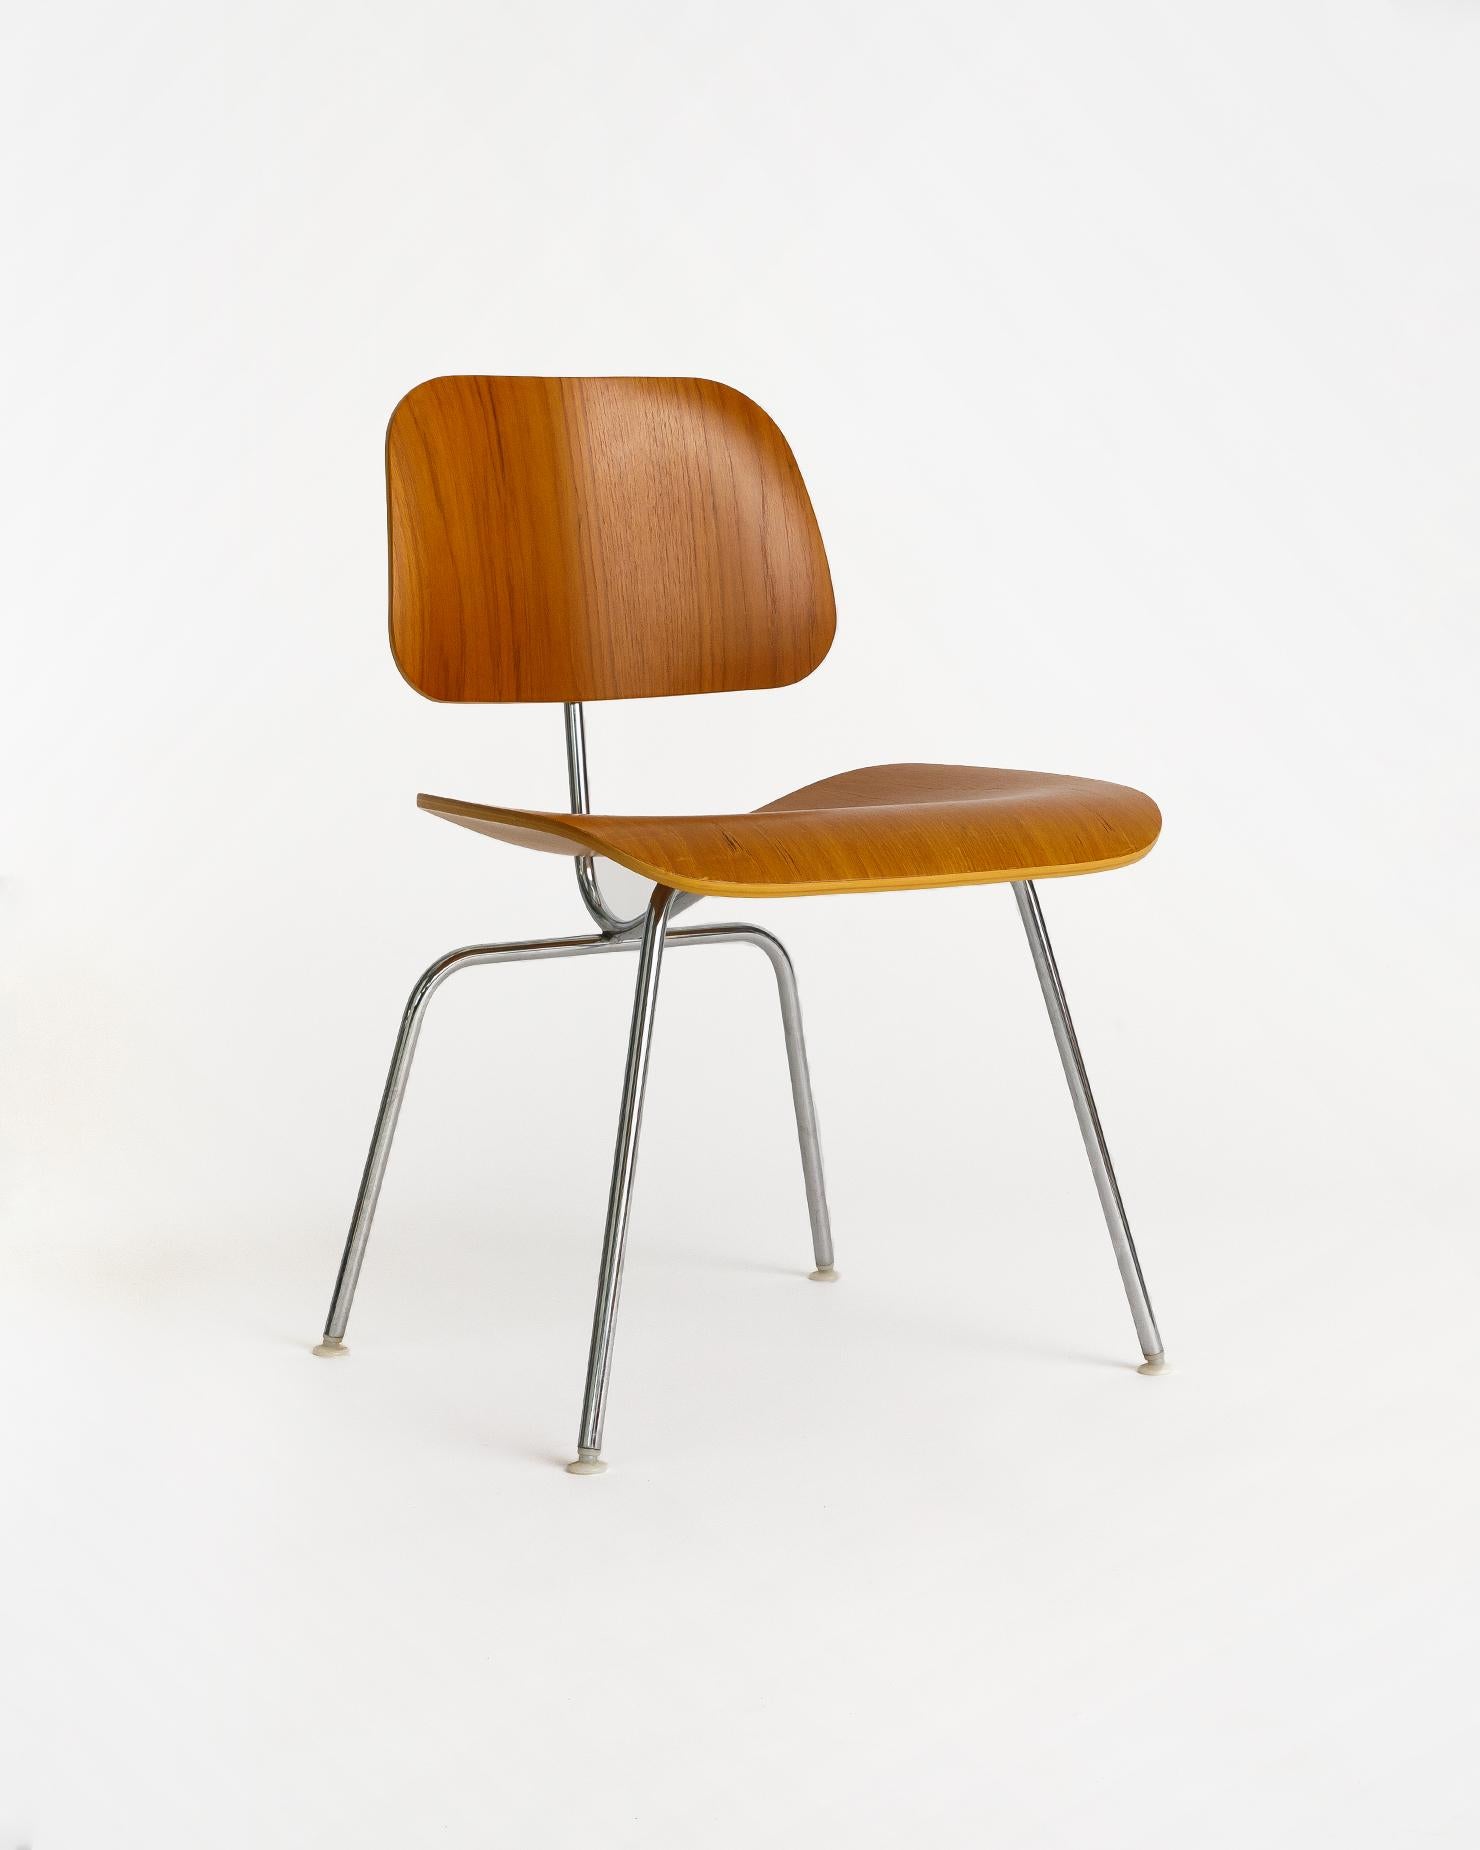 An iconic design by Charles and Ray Eames. This chair features a stylish and ergonomic molded seat and back. Manufactured in 2000-2001.

Priced as a set of 4 chairs.

30.25